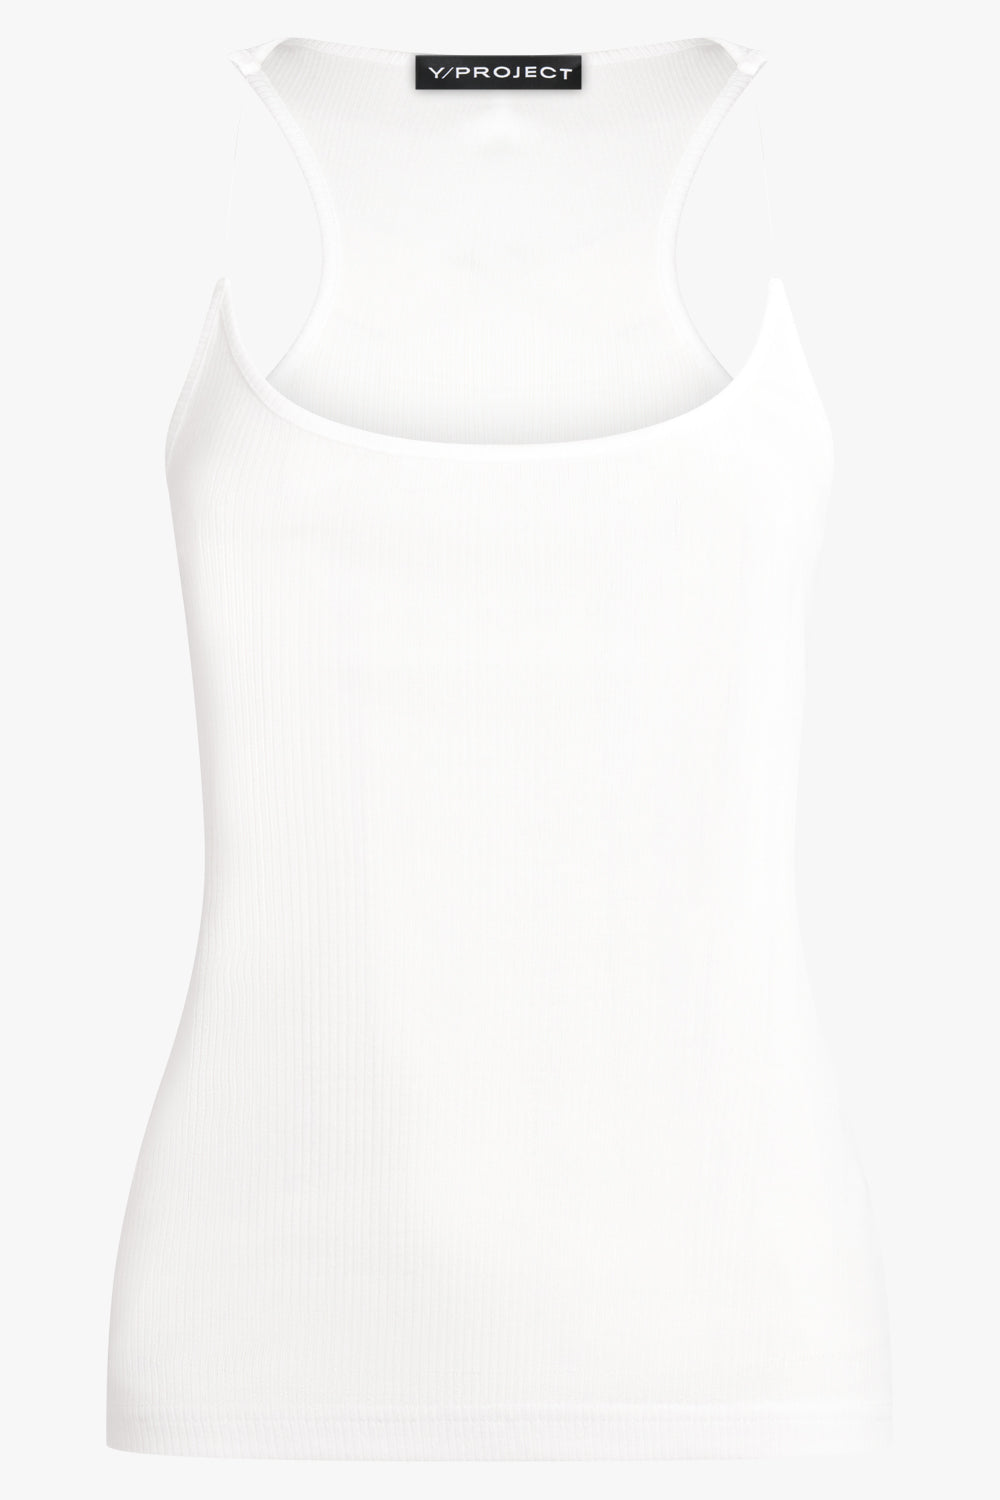 Y/PROJECT RTW Invisible Strap Tank Top | Optic White